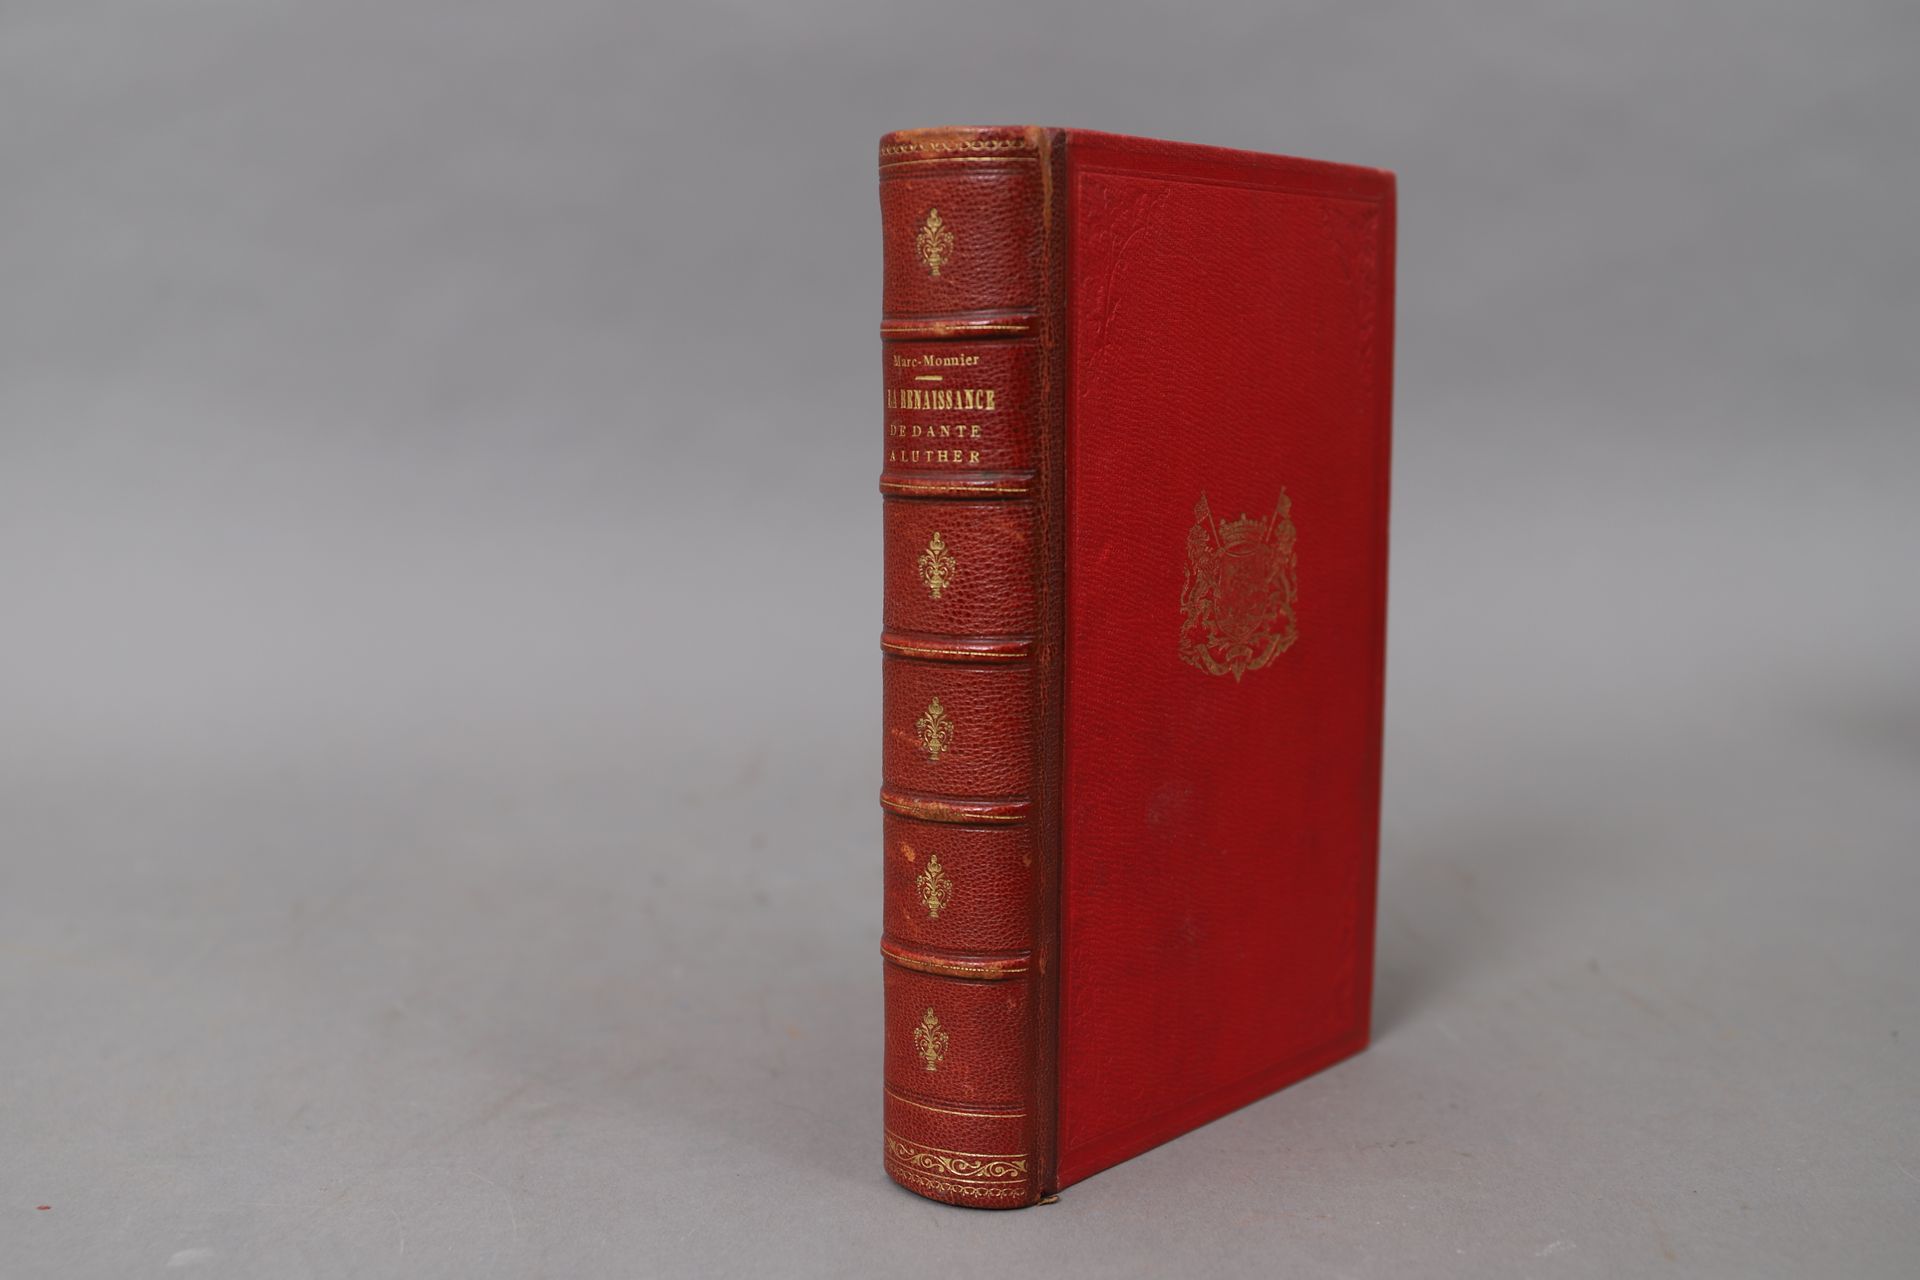 Null THE RENAISSANCE from DANTE to LUTHER.

1889, 

bound in half red chagrin.